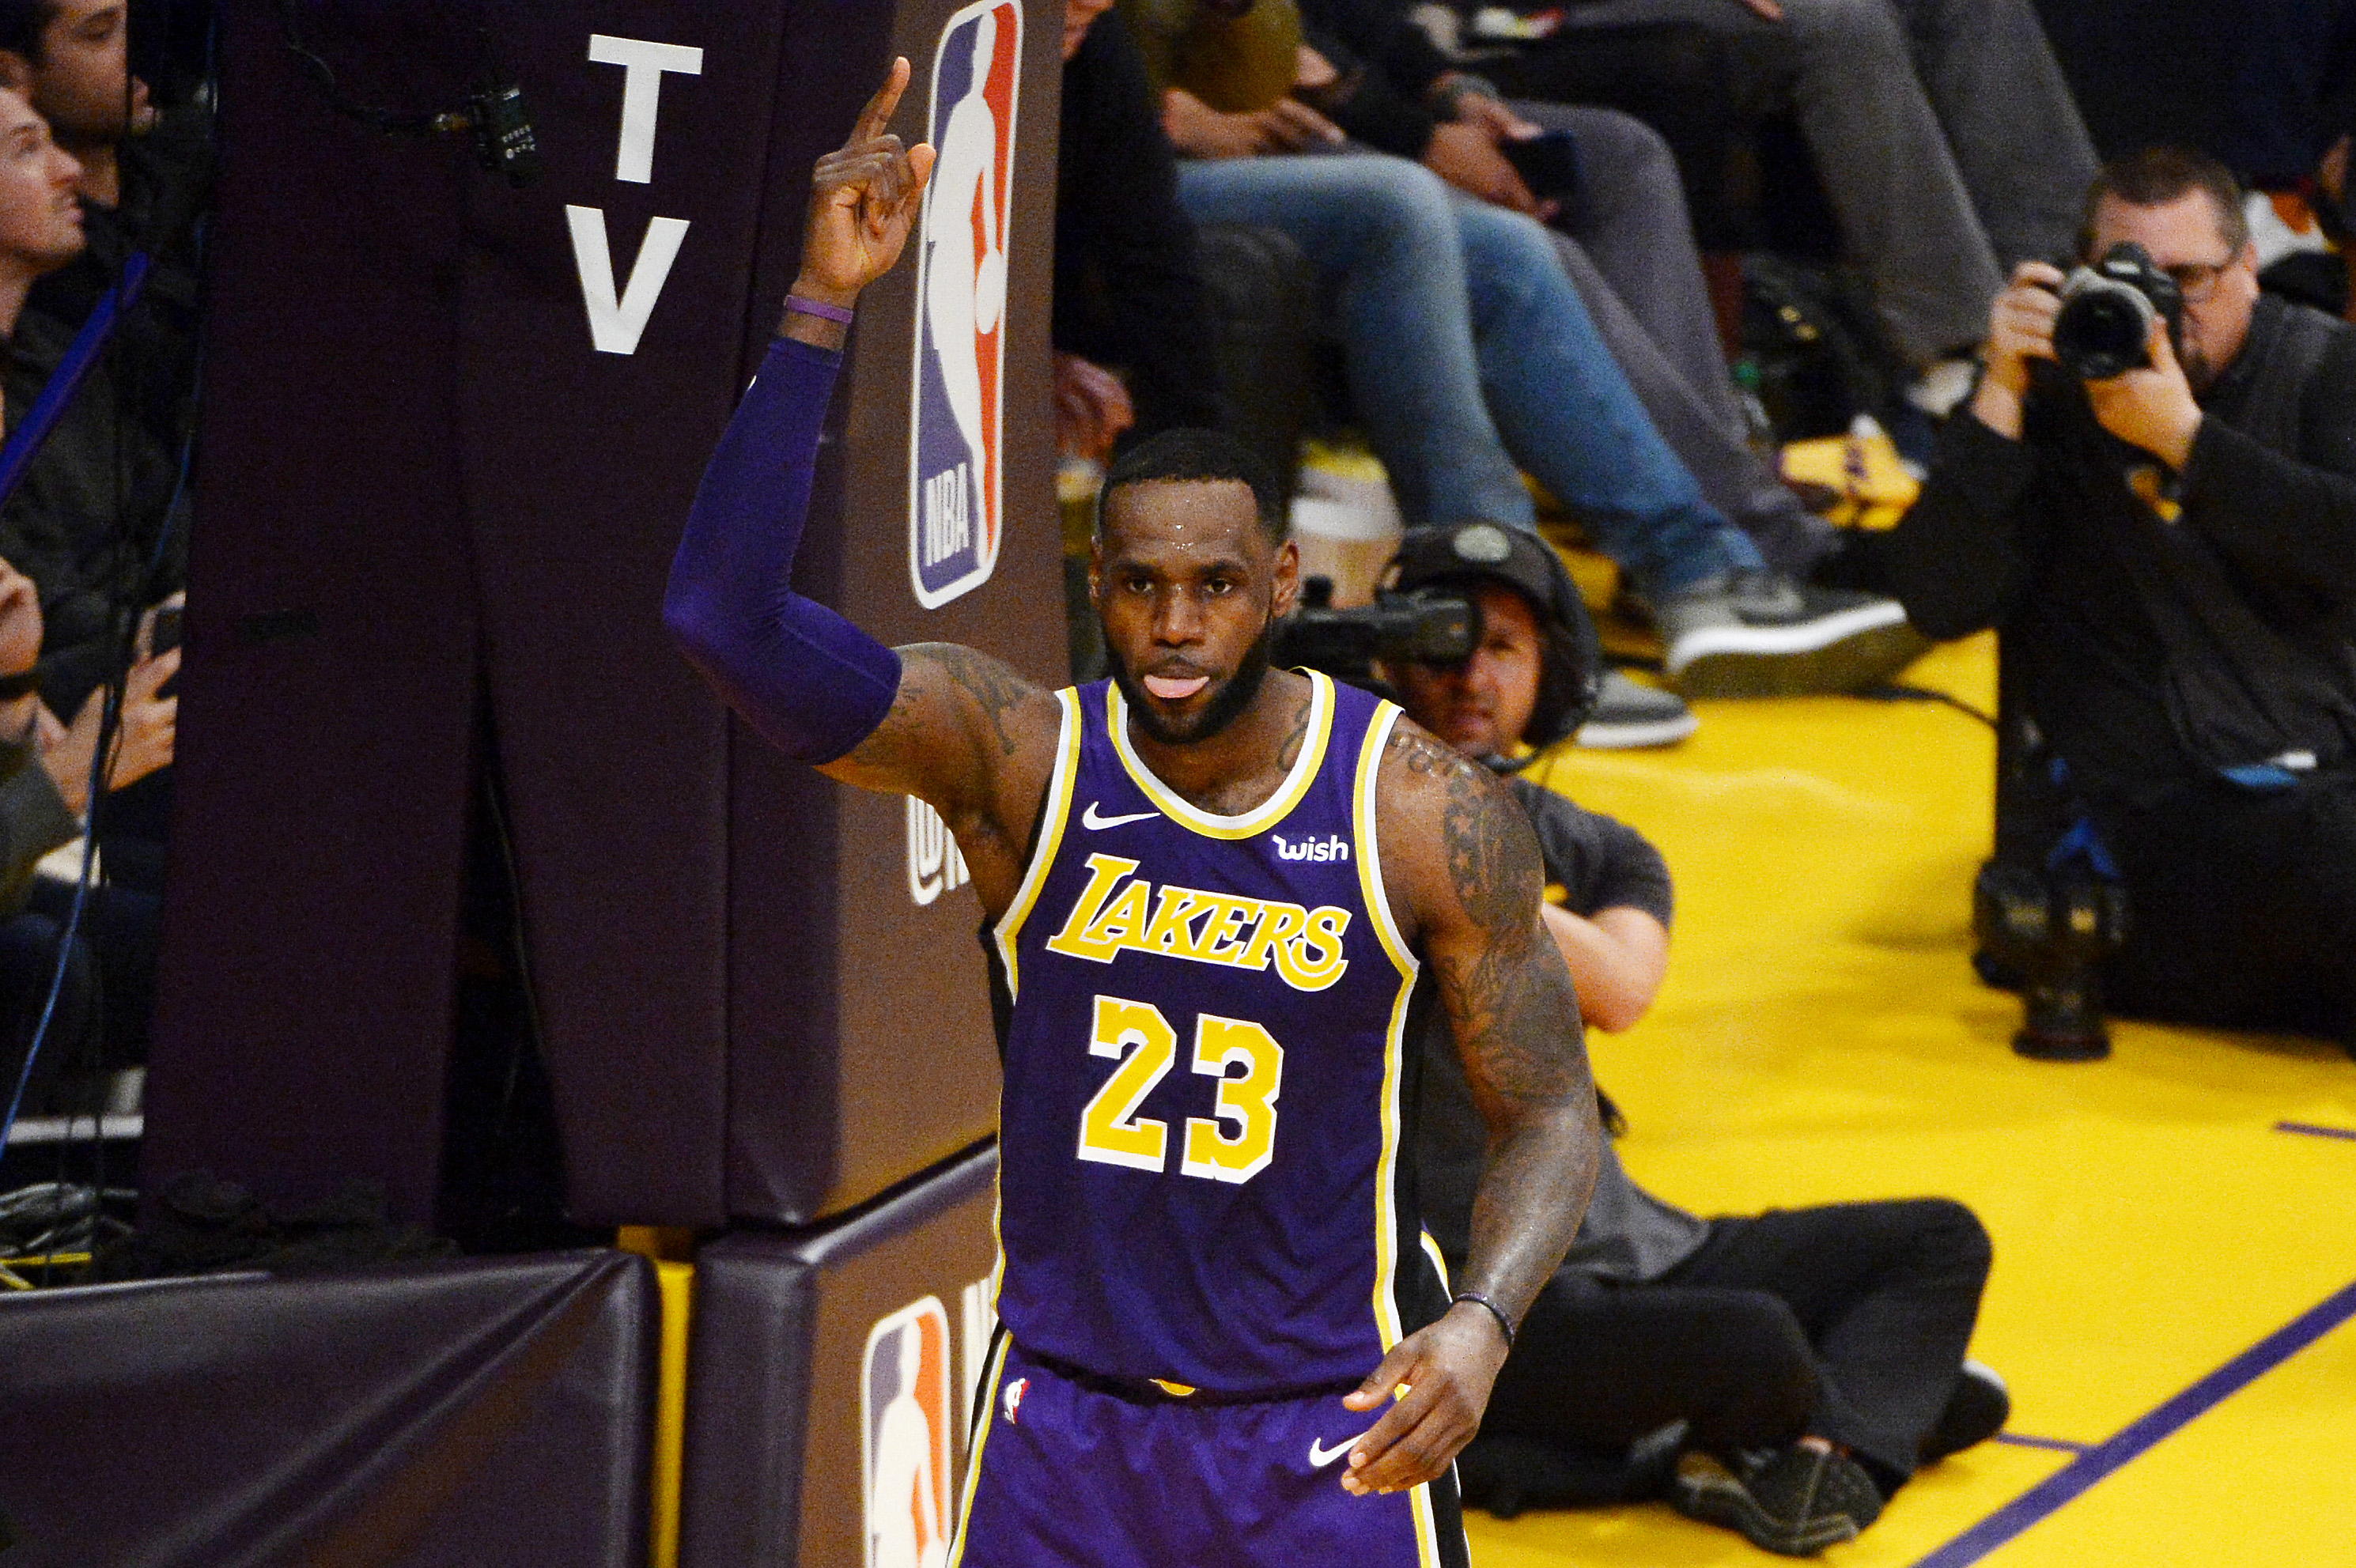 LeBron James needs to do two things to become basketball's GOAT, according to Shaquille O'Neal